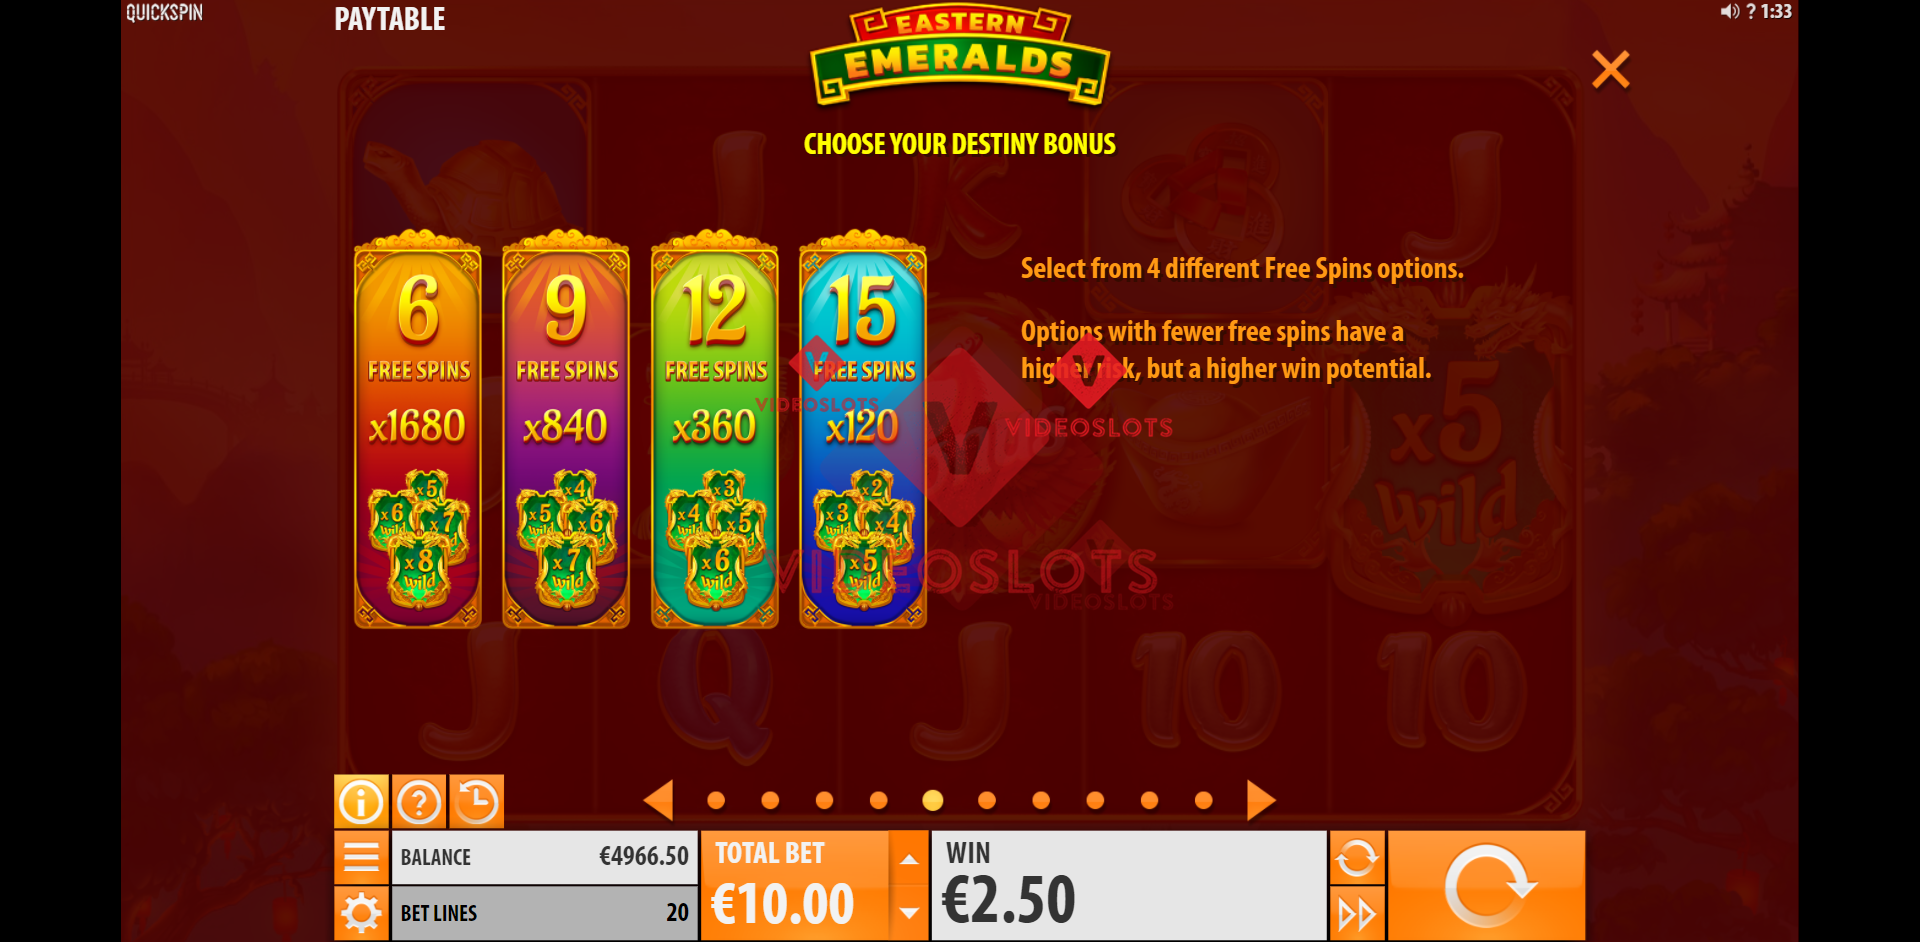 Pay Table and Game Info for Eastern Emeralds slot from Quickspin